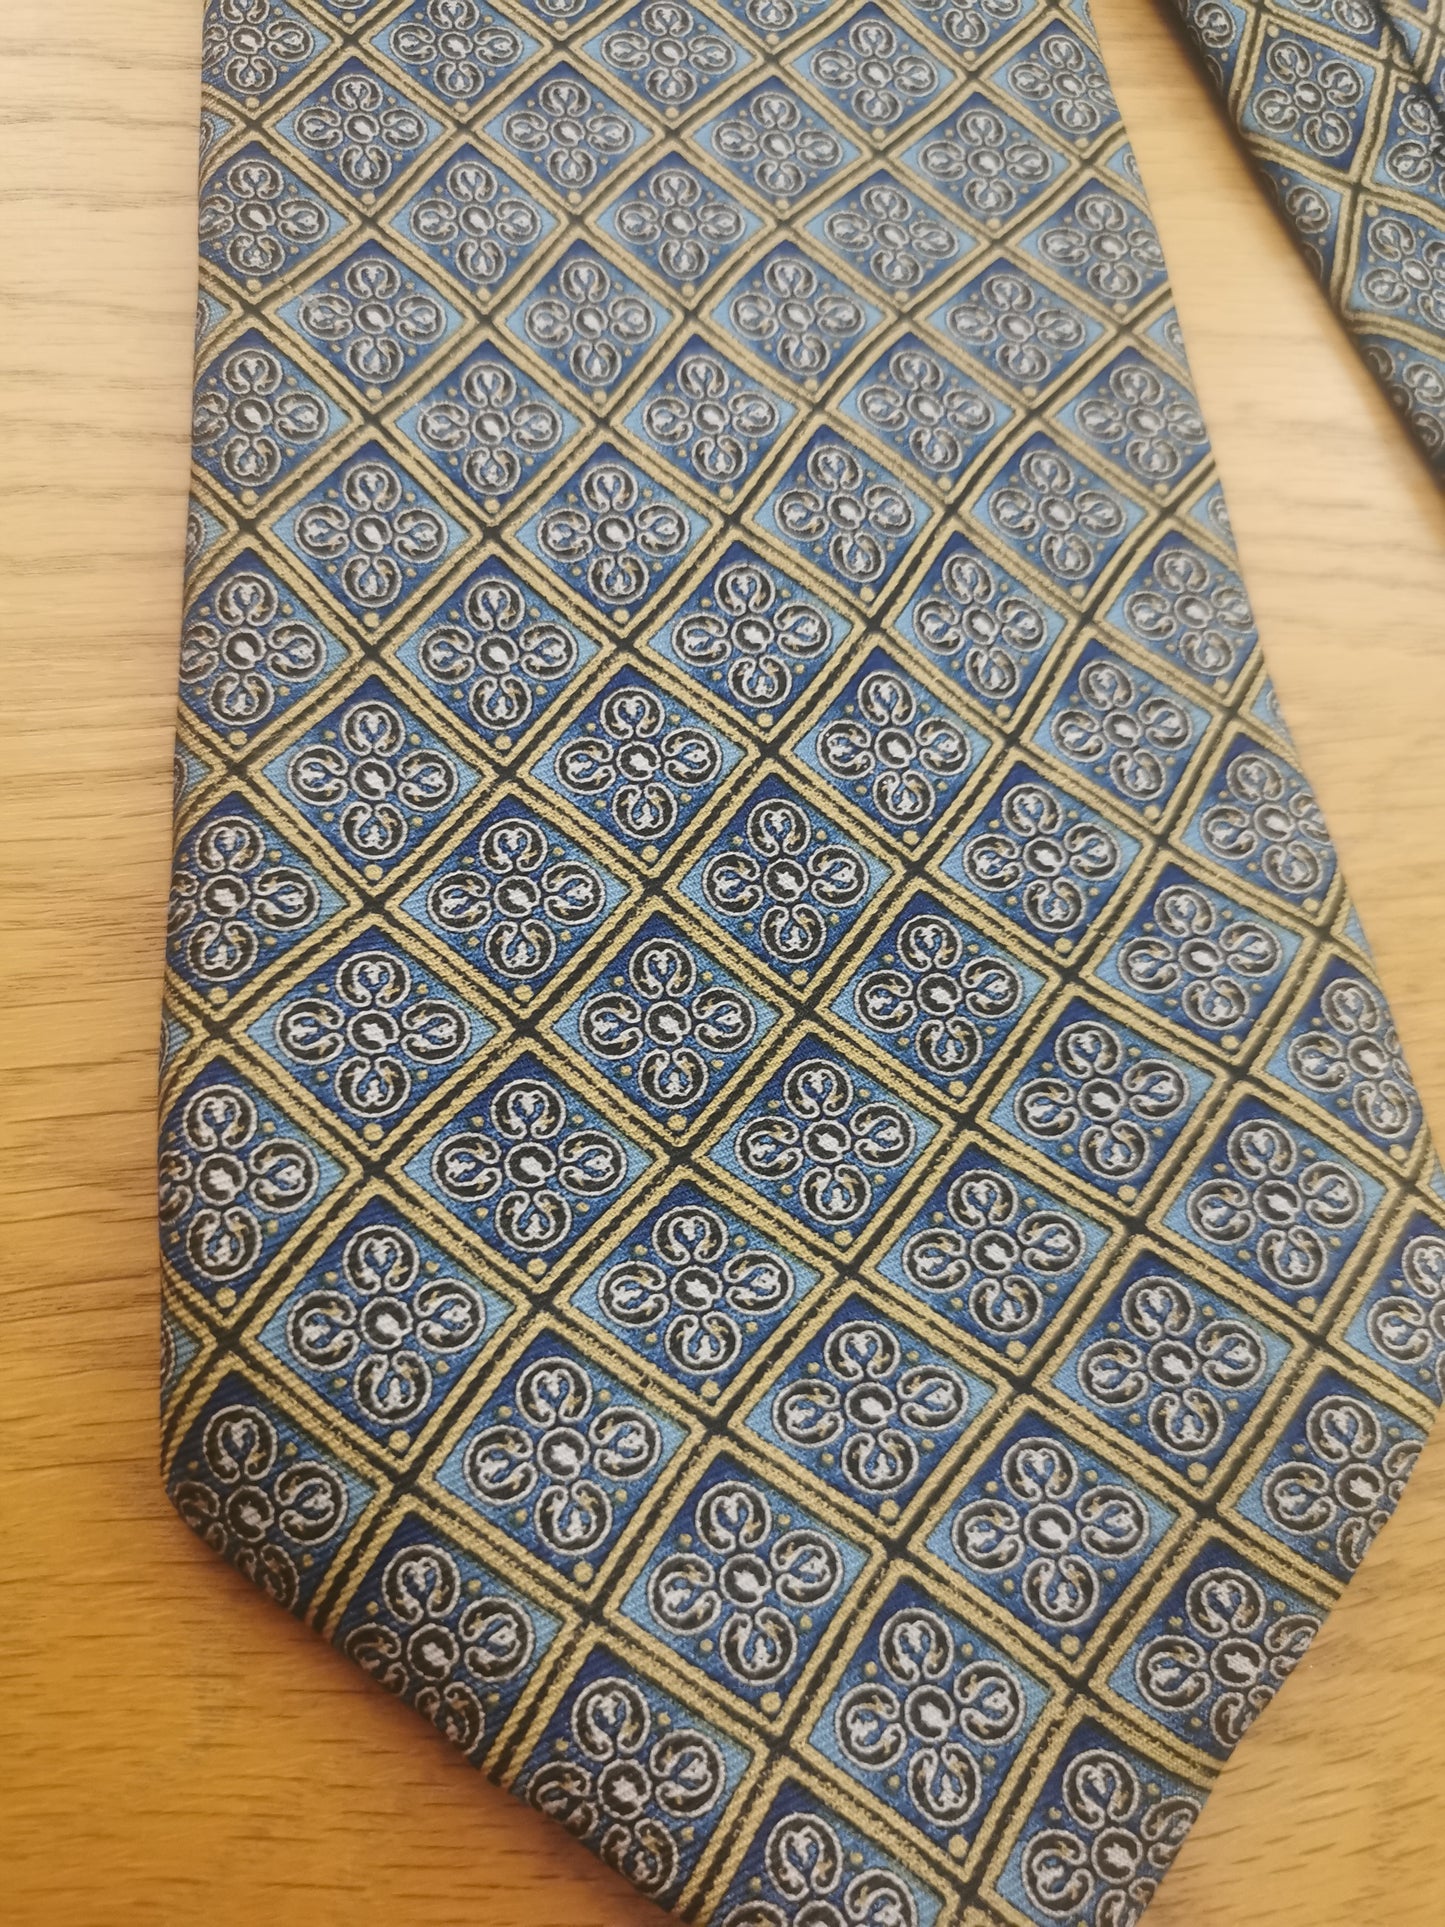 100% silk Fox & Chave tie made for the V&A Museum collection